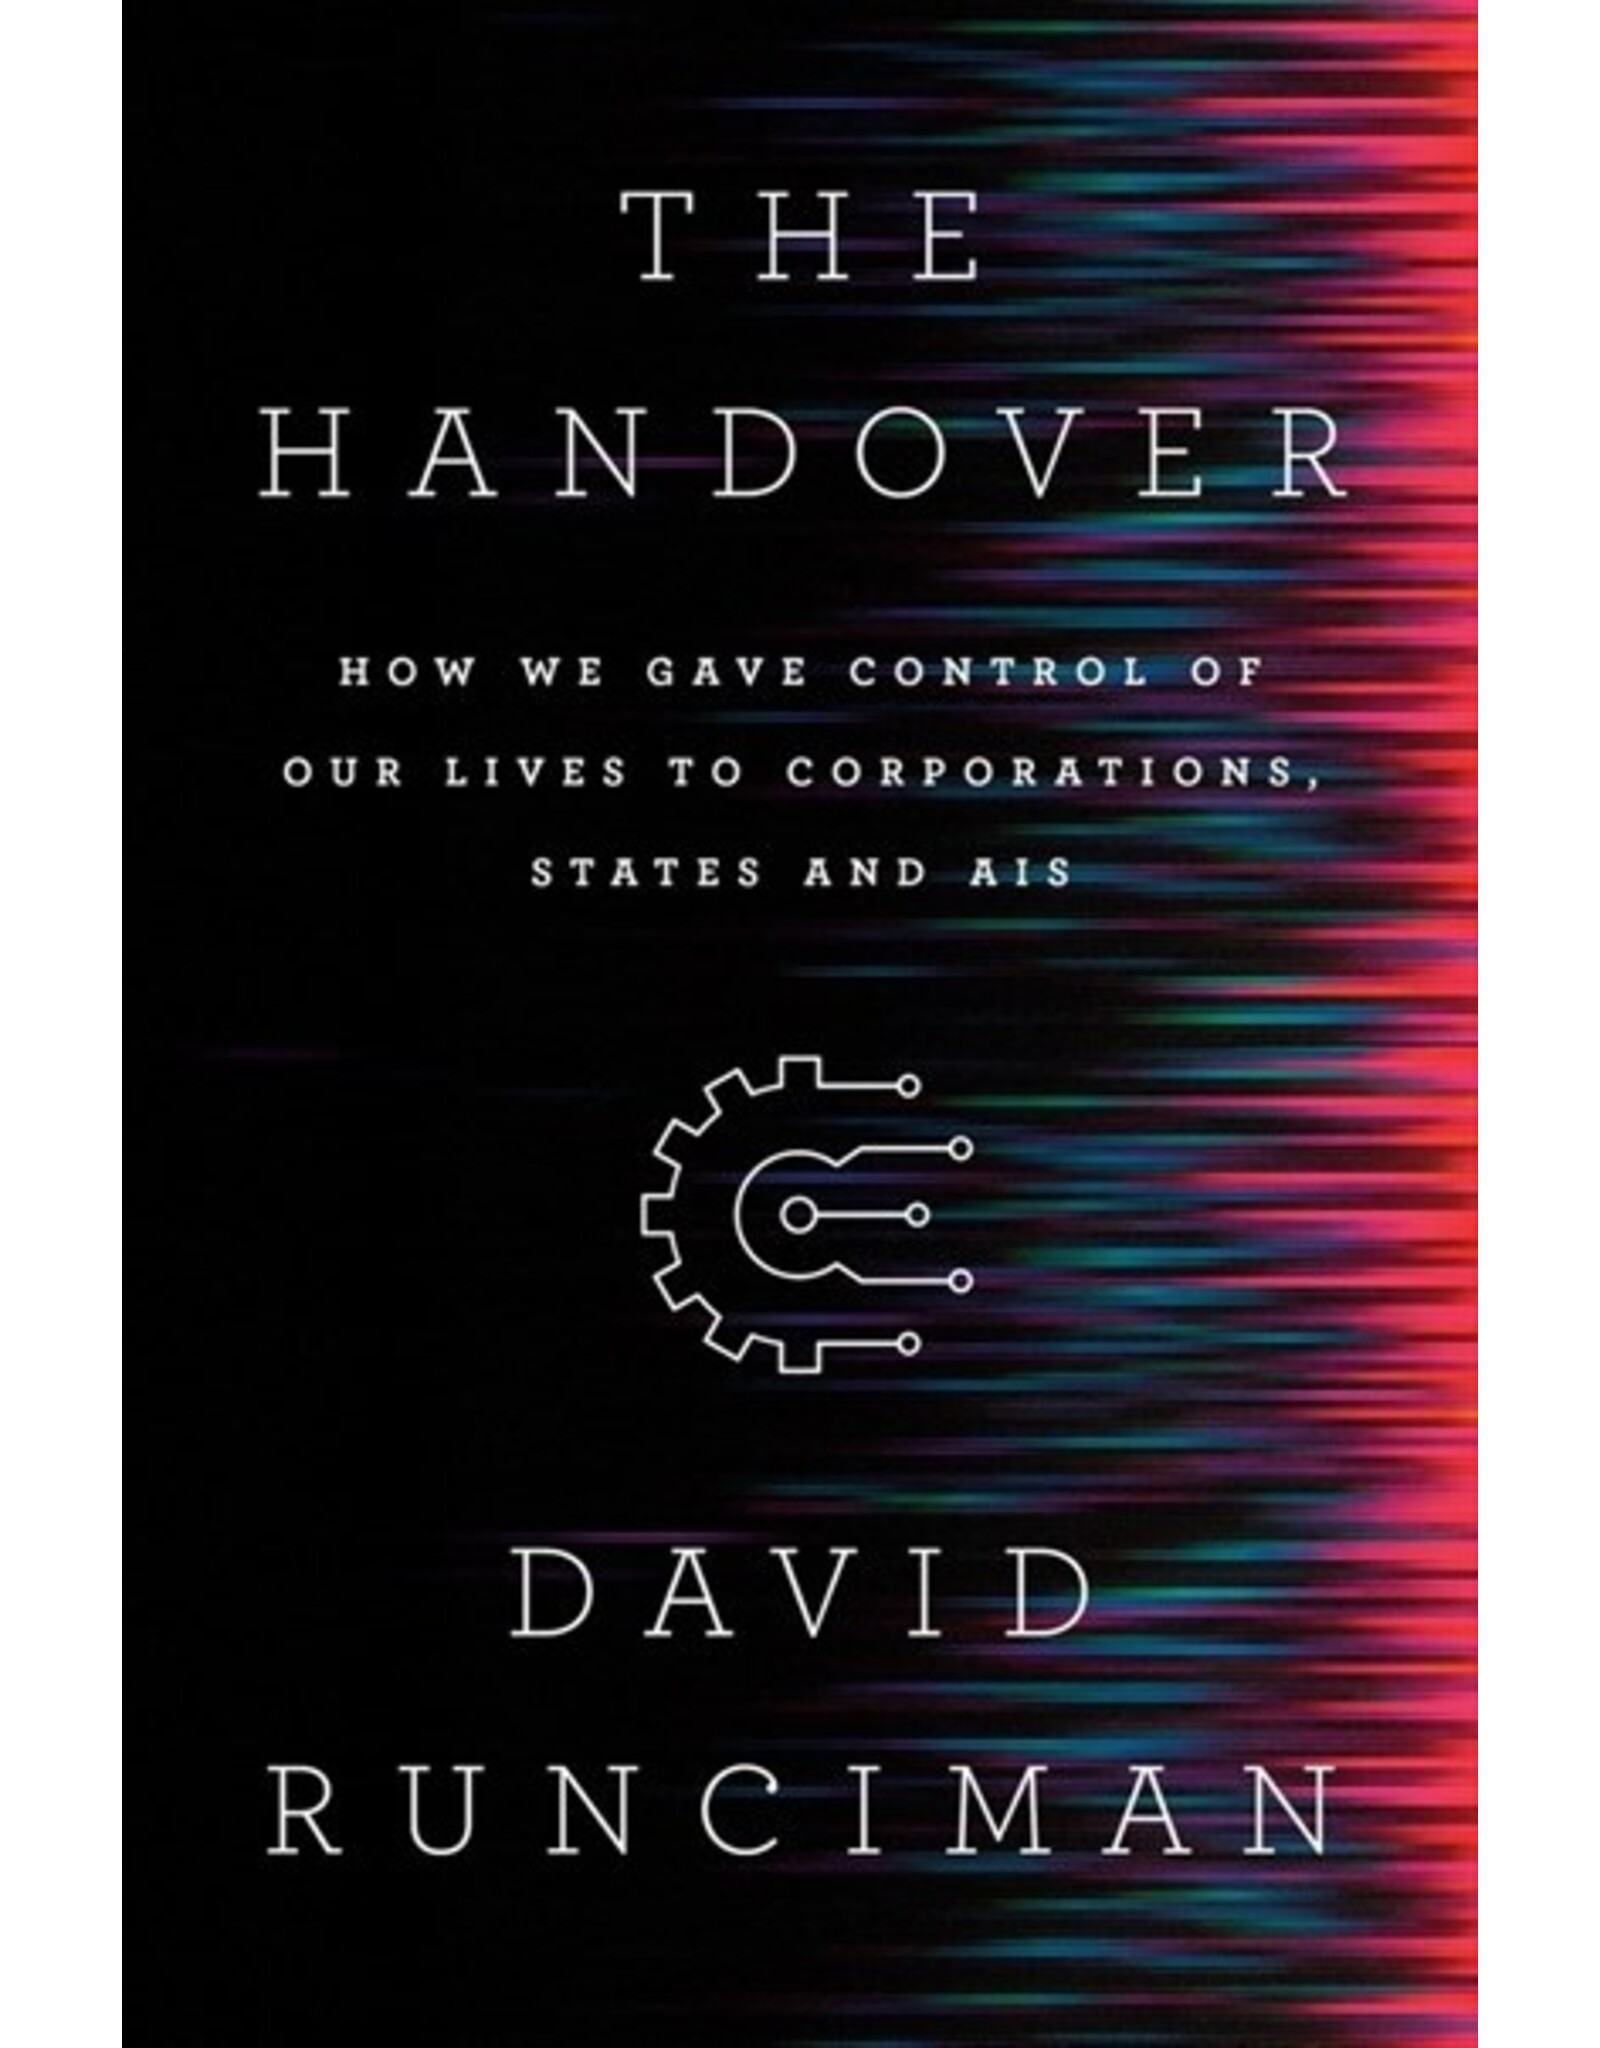 Books The Handover: How We Gave Control of Our Lives to Corporations, States and AIS by David Runciman